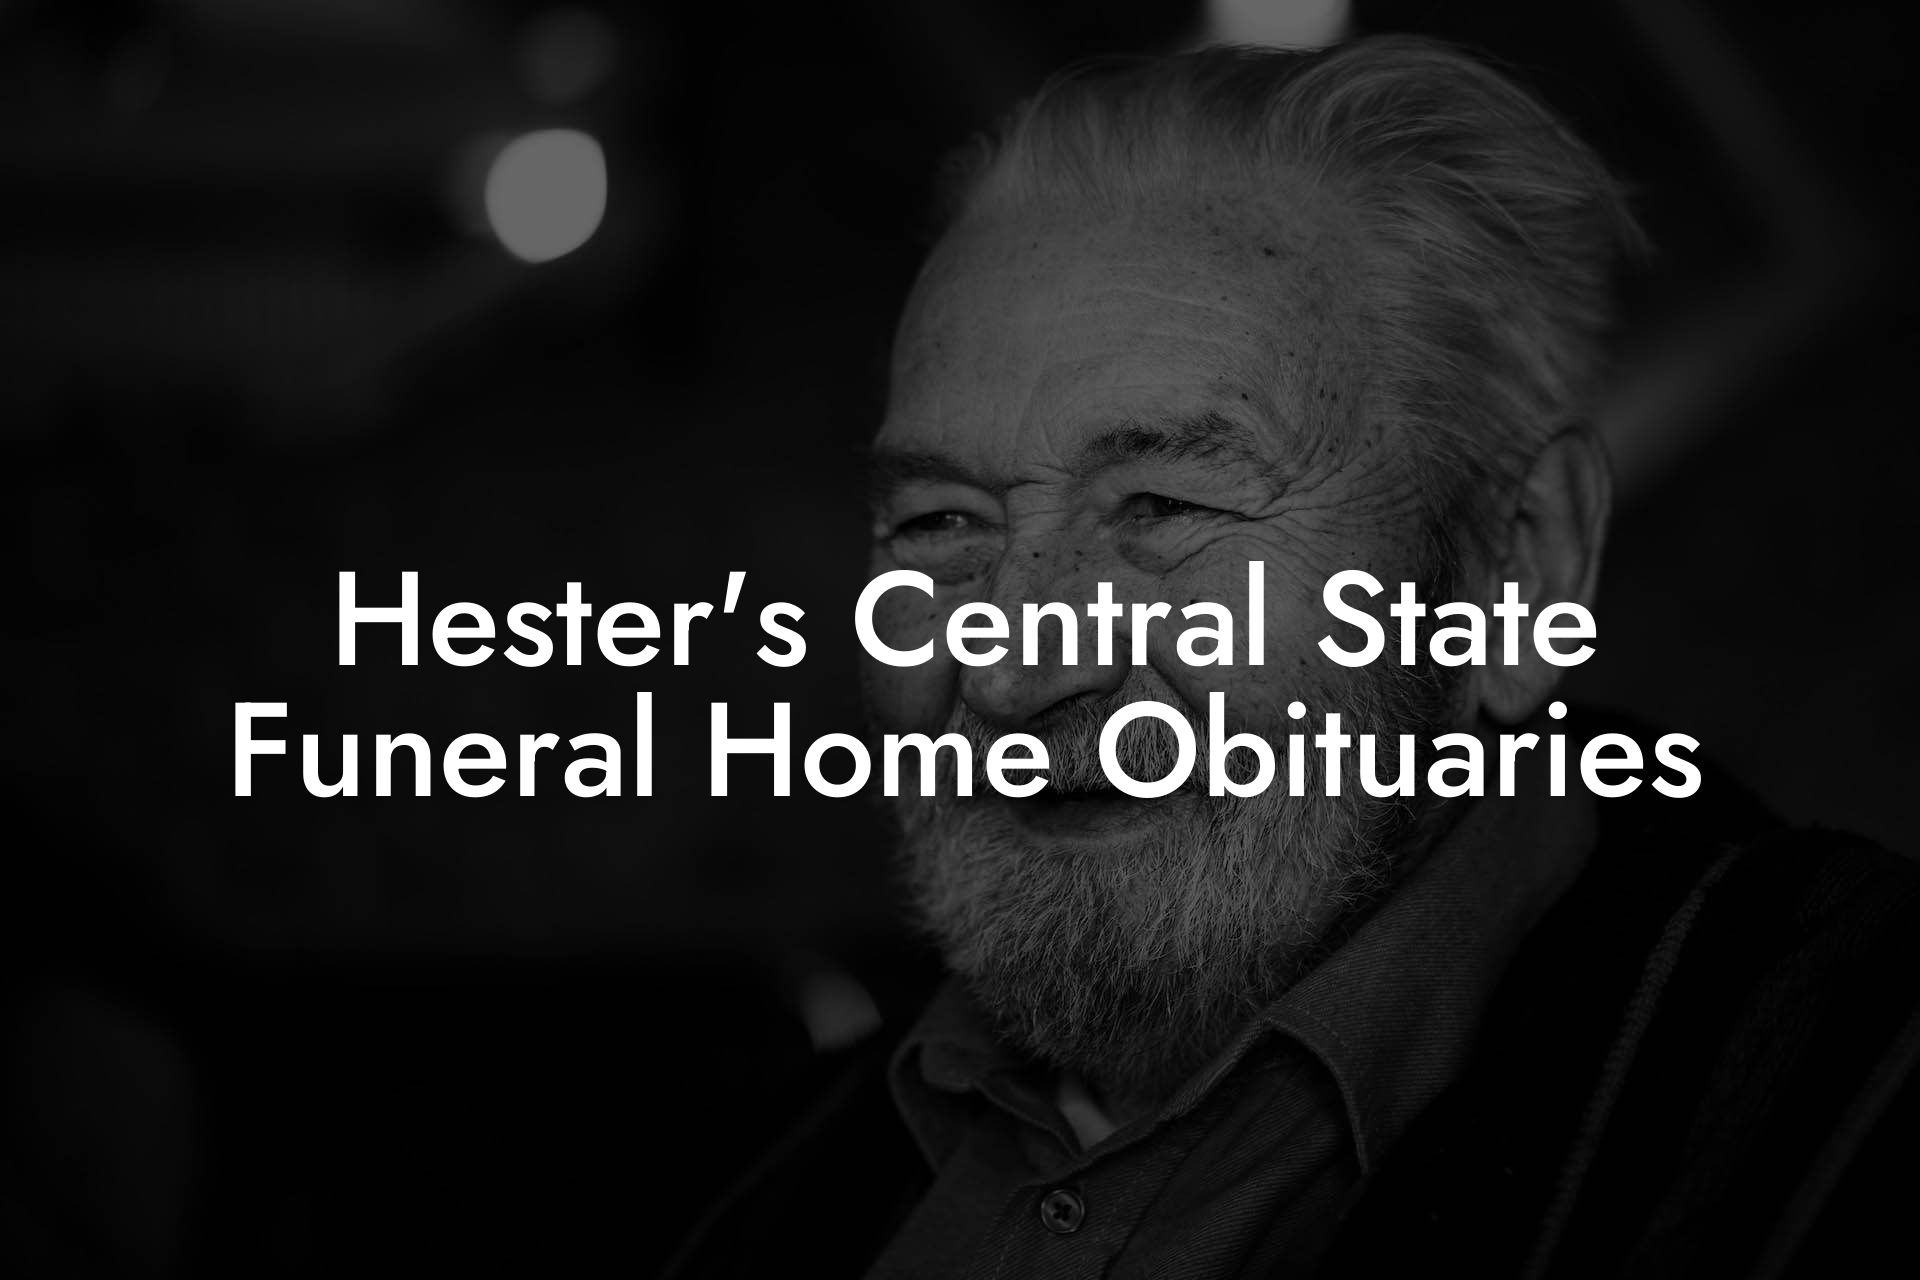 Hester's Central State Funeral Home Obituaries